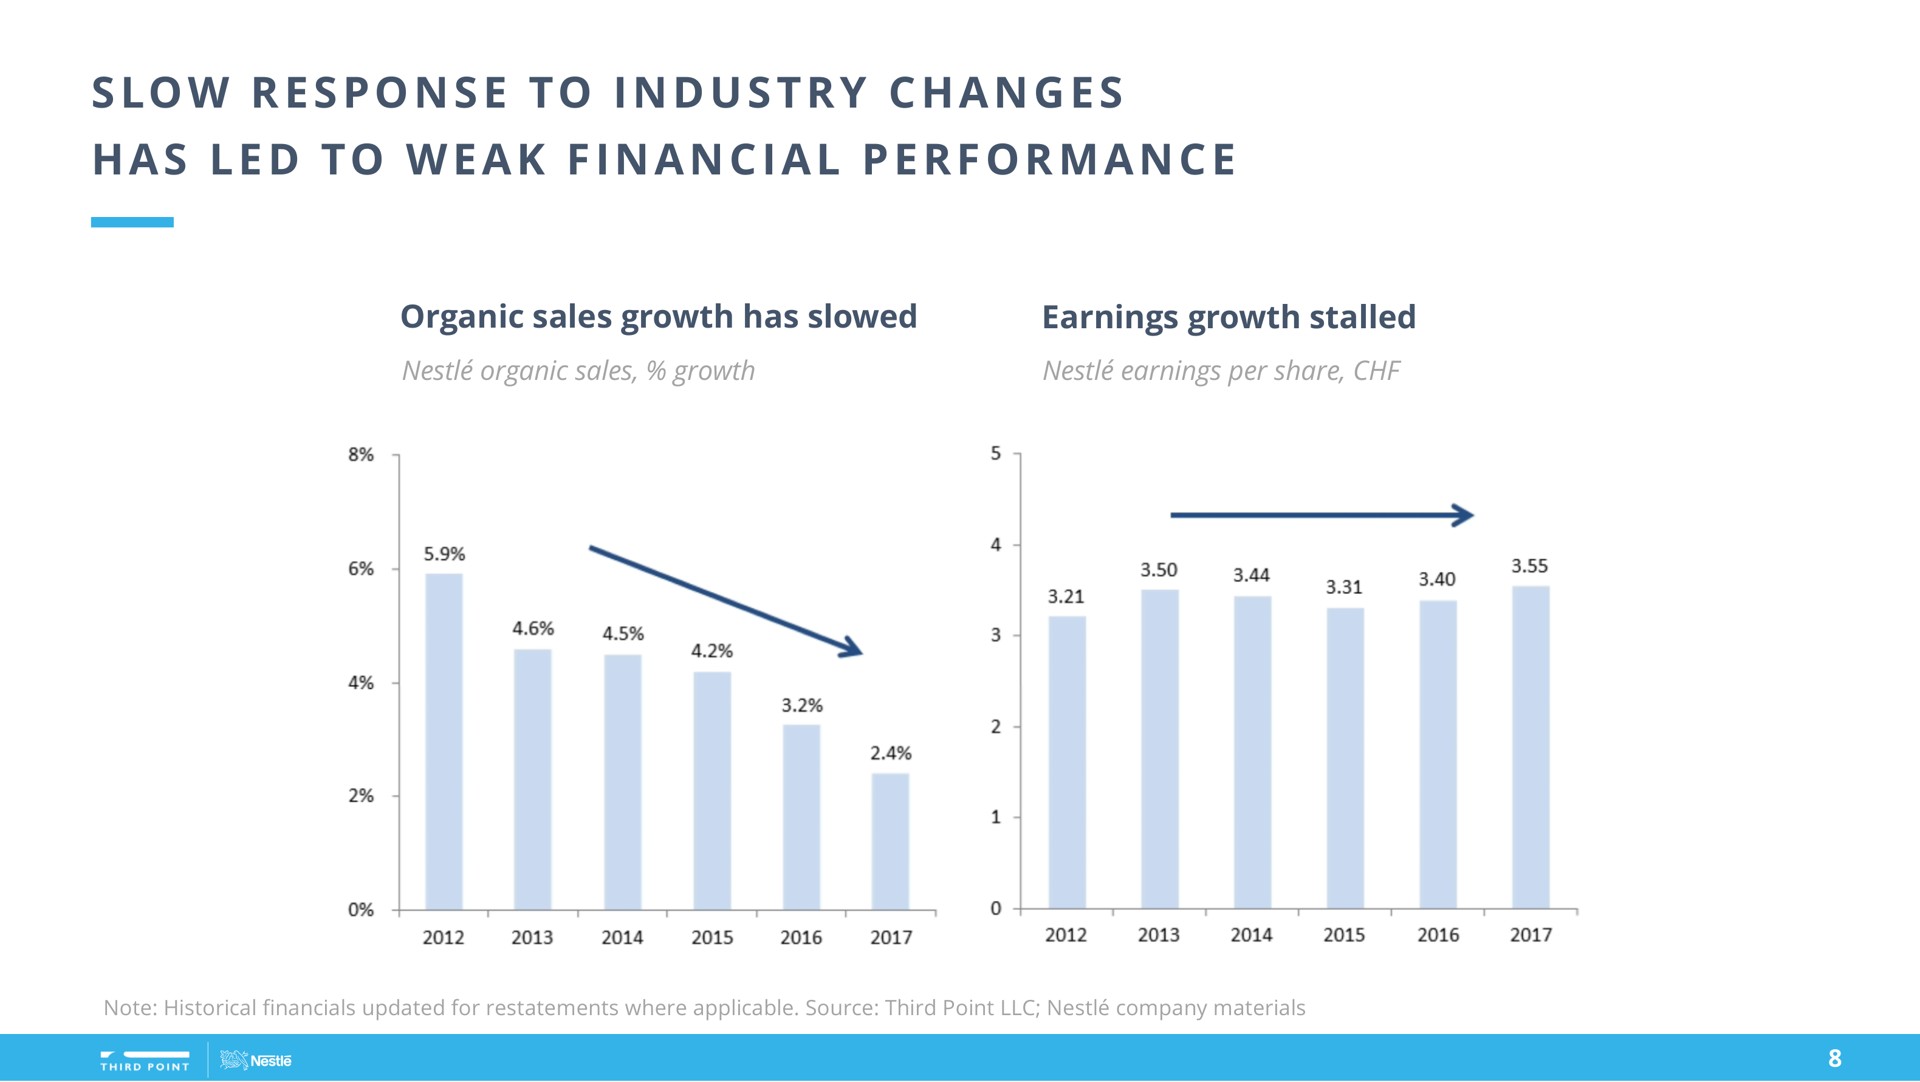 financial performance i a a a i a i a a slow response to industry changes has led to weak | Third Point Management